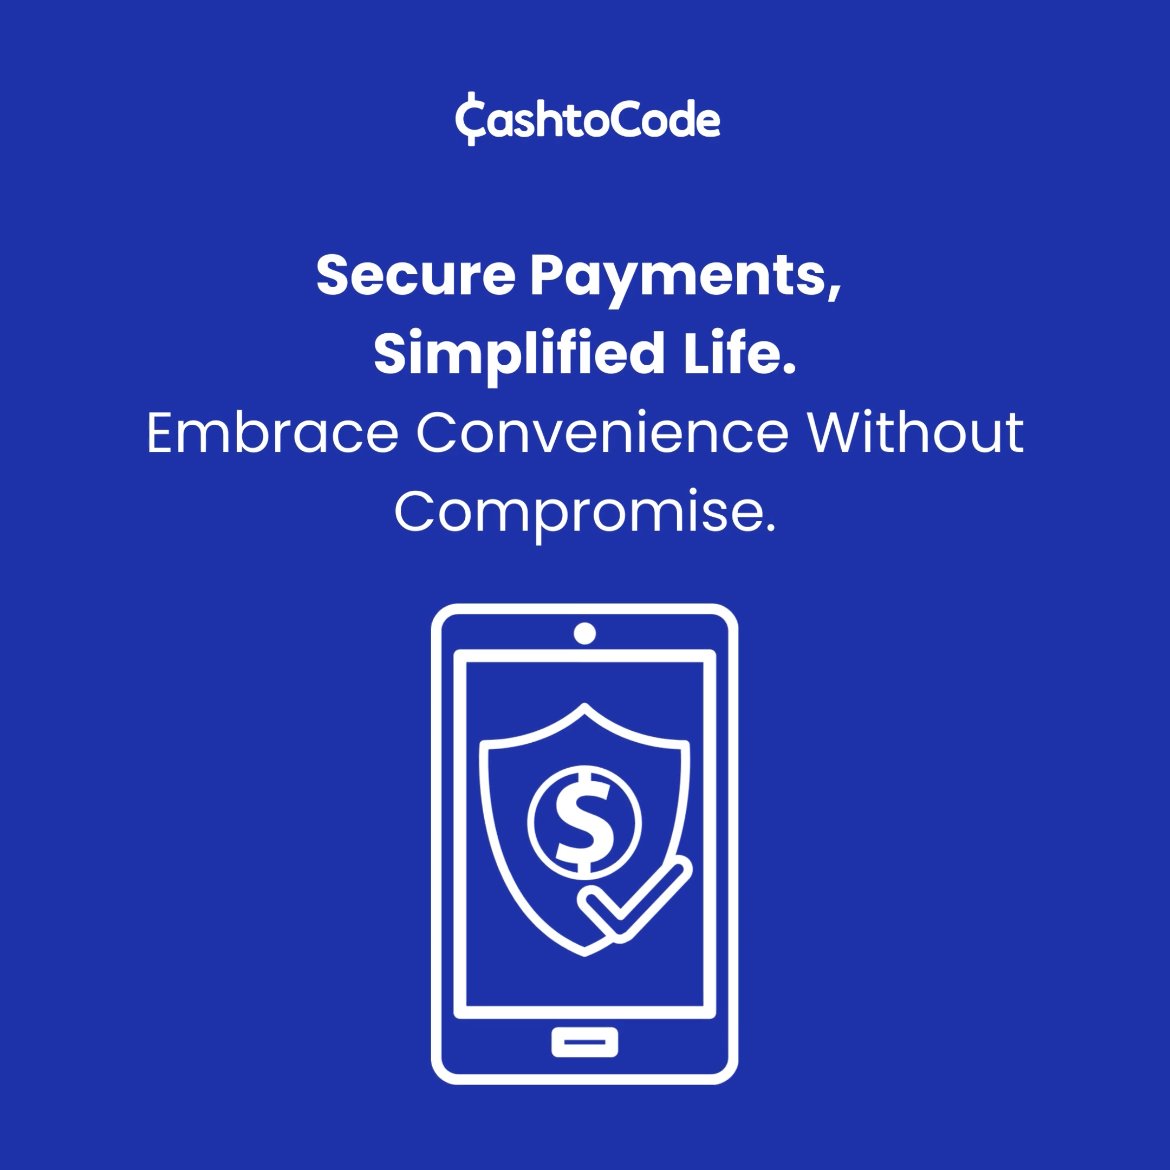 CashtoCode brings security and simplicity to your life. Enjoy the convenience of online payments without compromise. Secure, simplified living.

Take the first step towards stress-free transactions!
🔗cashtocode.com

#SecurePayments #cashtocode